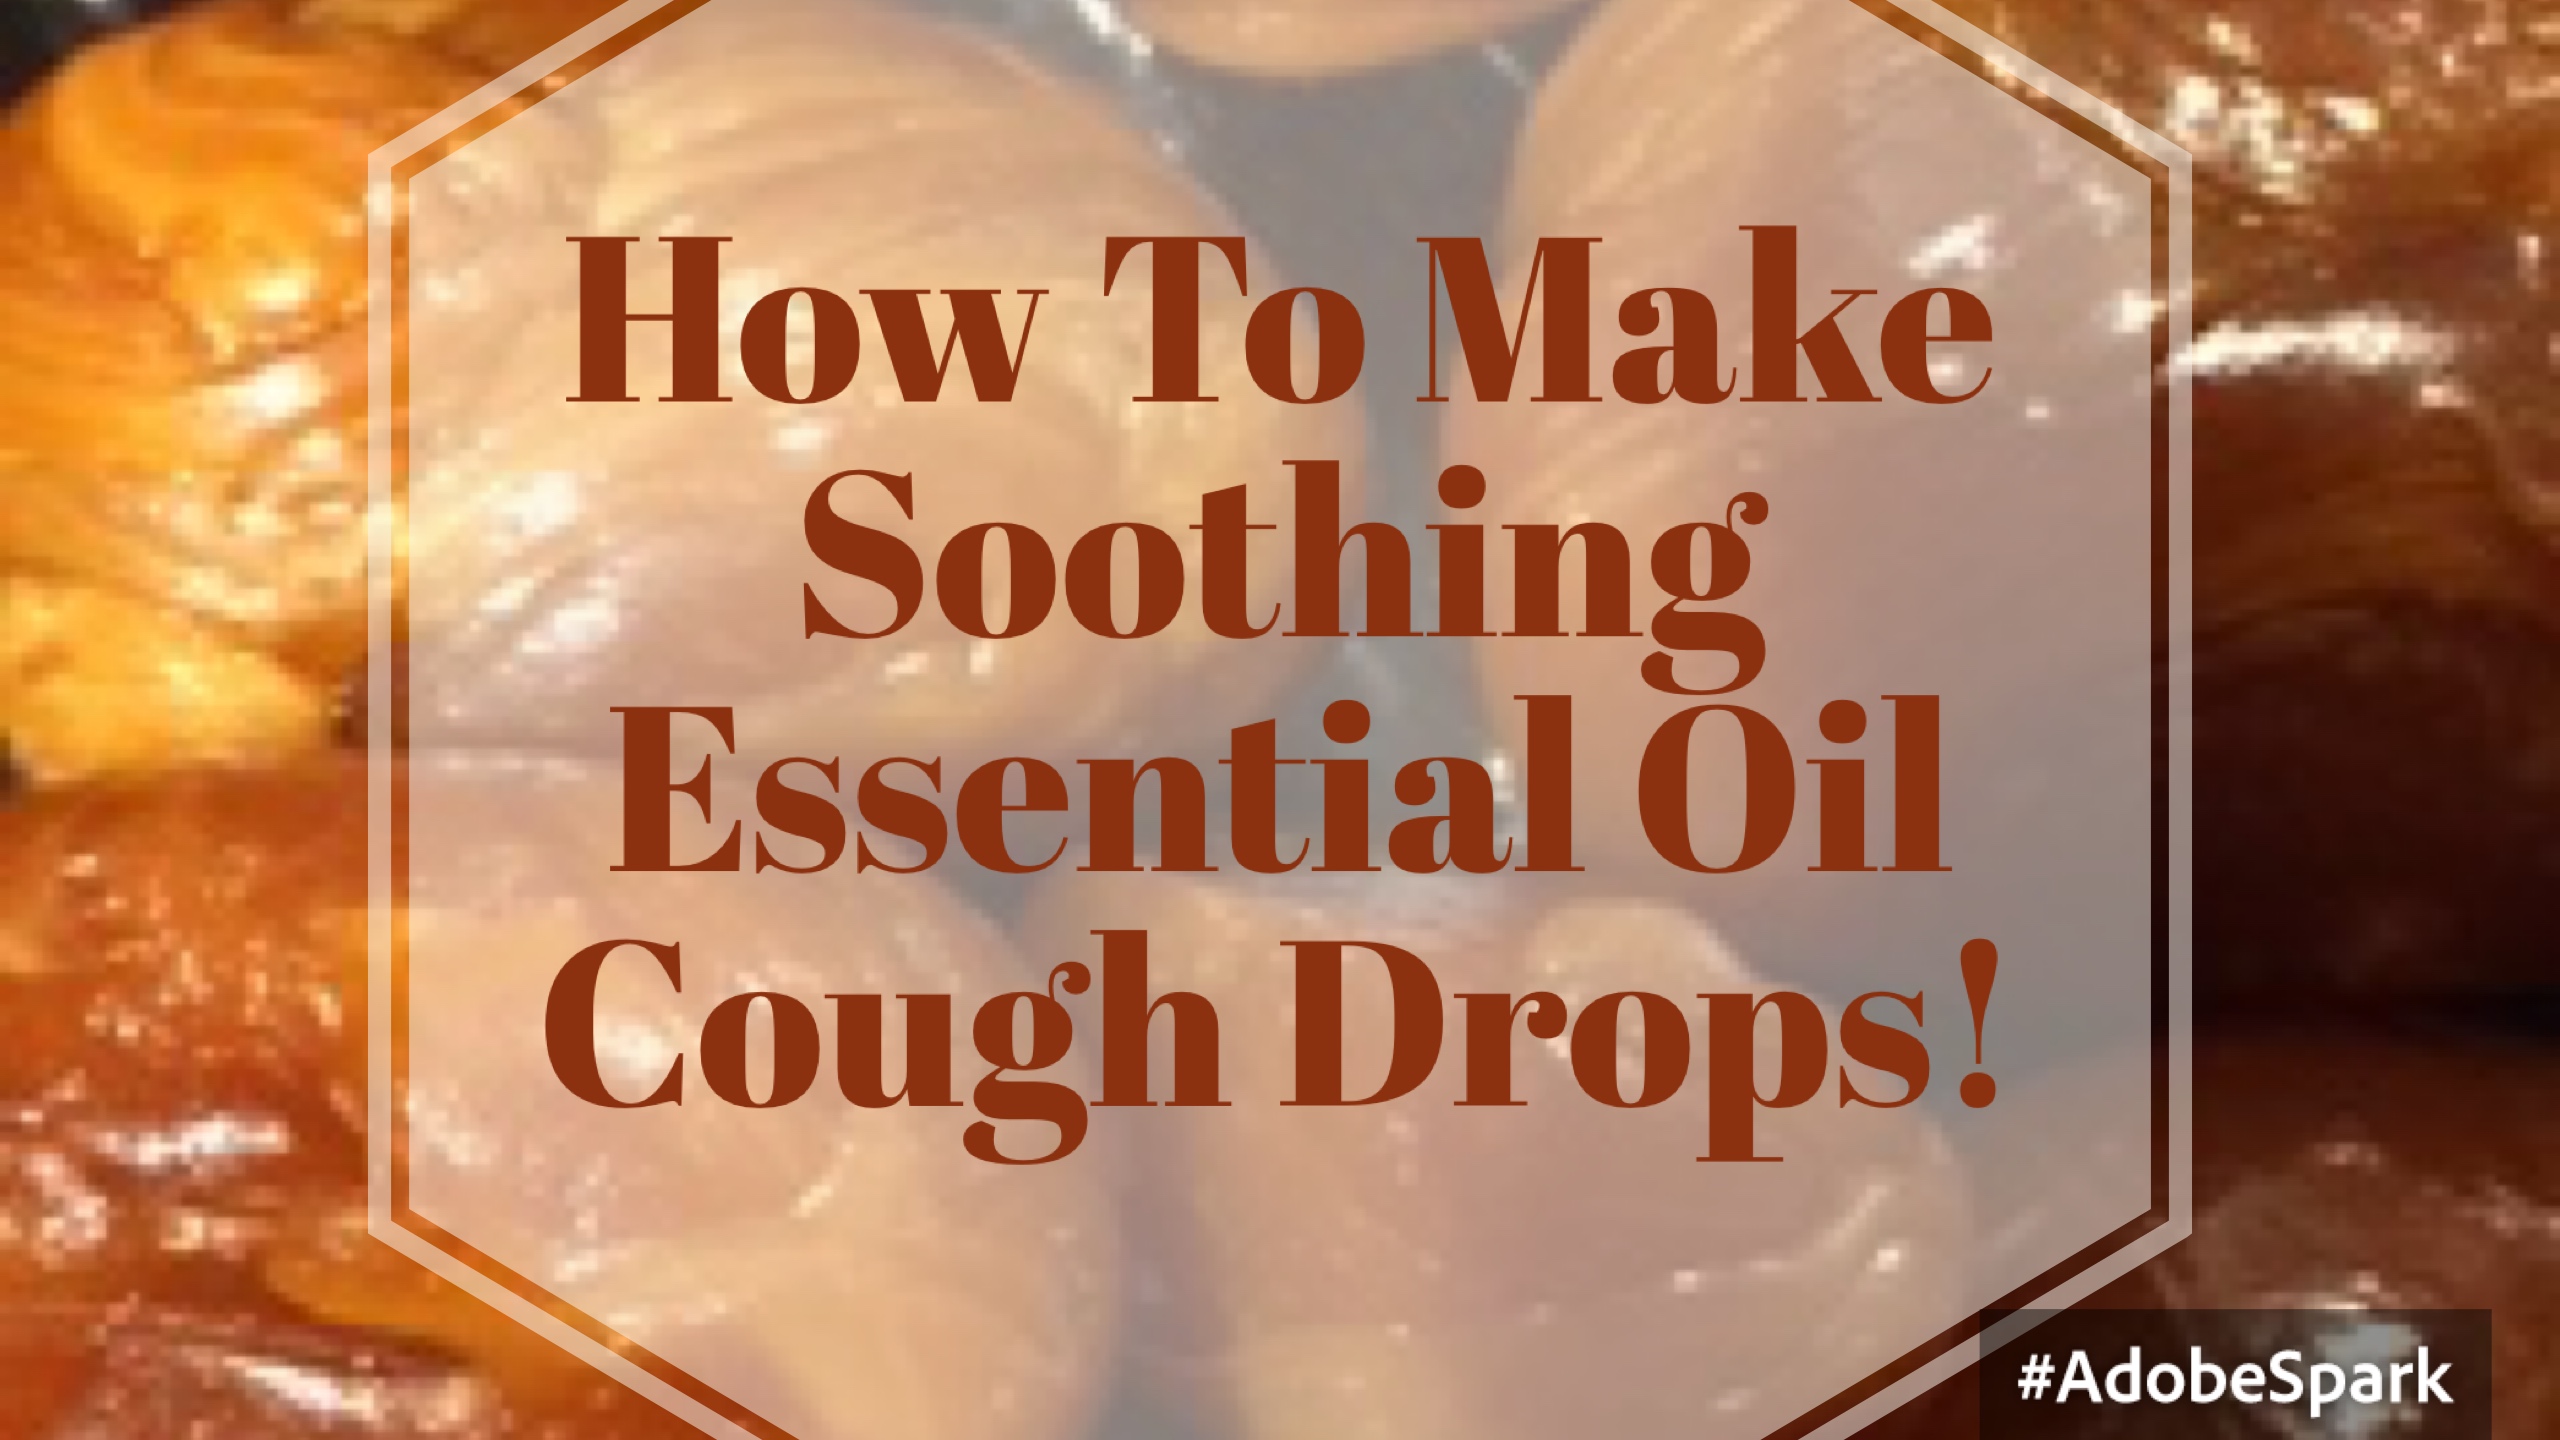 How To Make Soothing Essential Oil Cough Drops!